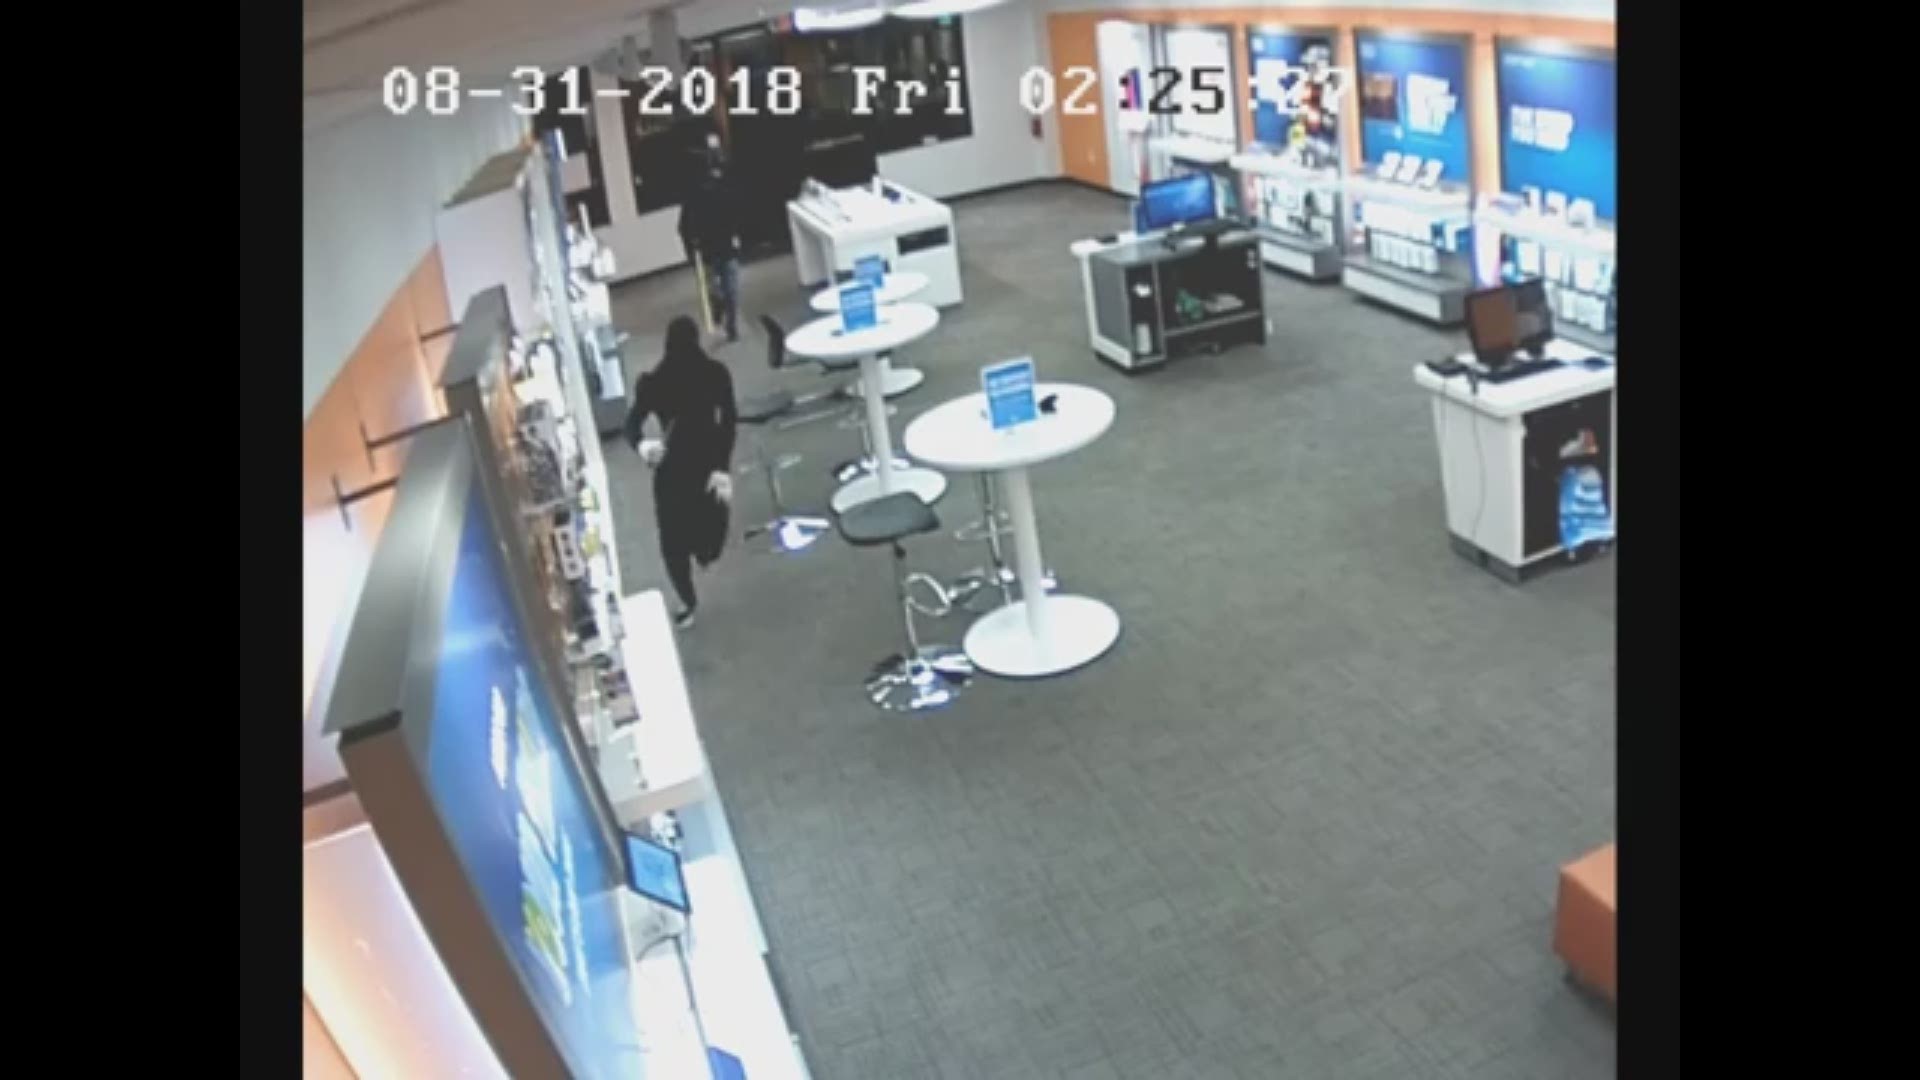 Deputies say three suspects cause thousands of dollars in damages trying to steal phones from AT&T at 7372 Two Notch Road around 2:20 a.m. on August 31.